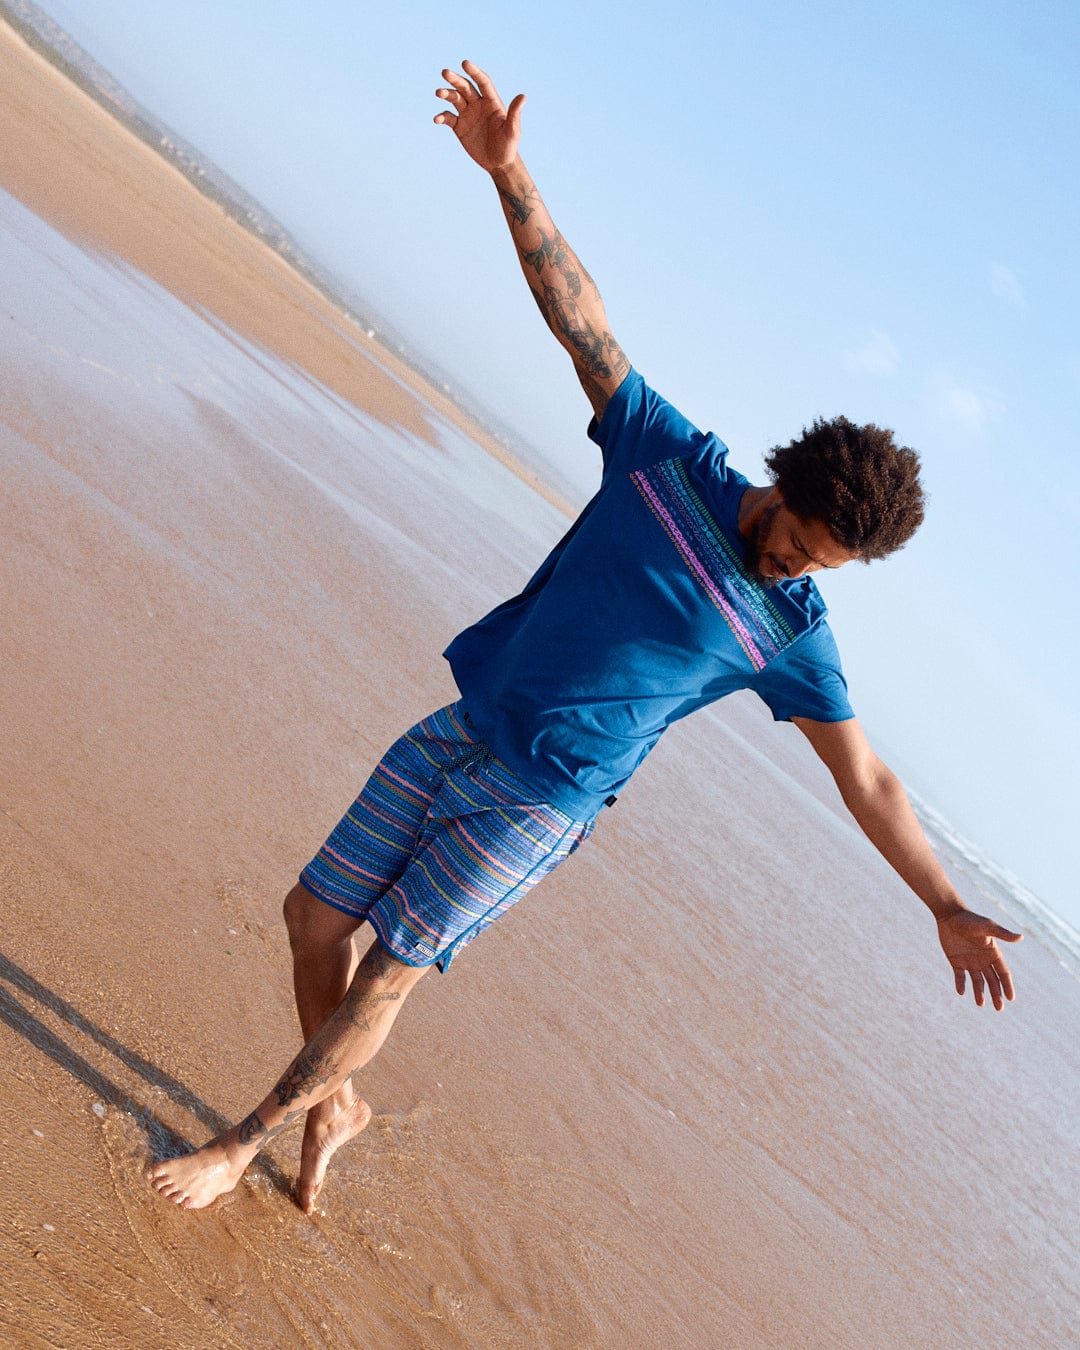 A young man with a tattoo on his arm balances on one leg on a sandy beach, wearing a Marks Chest - Mens Short Sleeve T-Shirt in Blue by Saltrock, and patterned shorts, his arms outstretched.